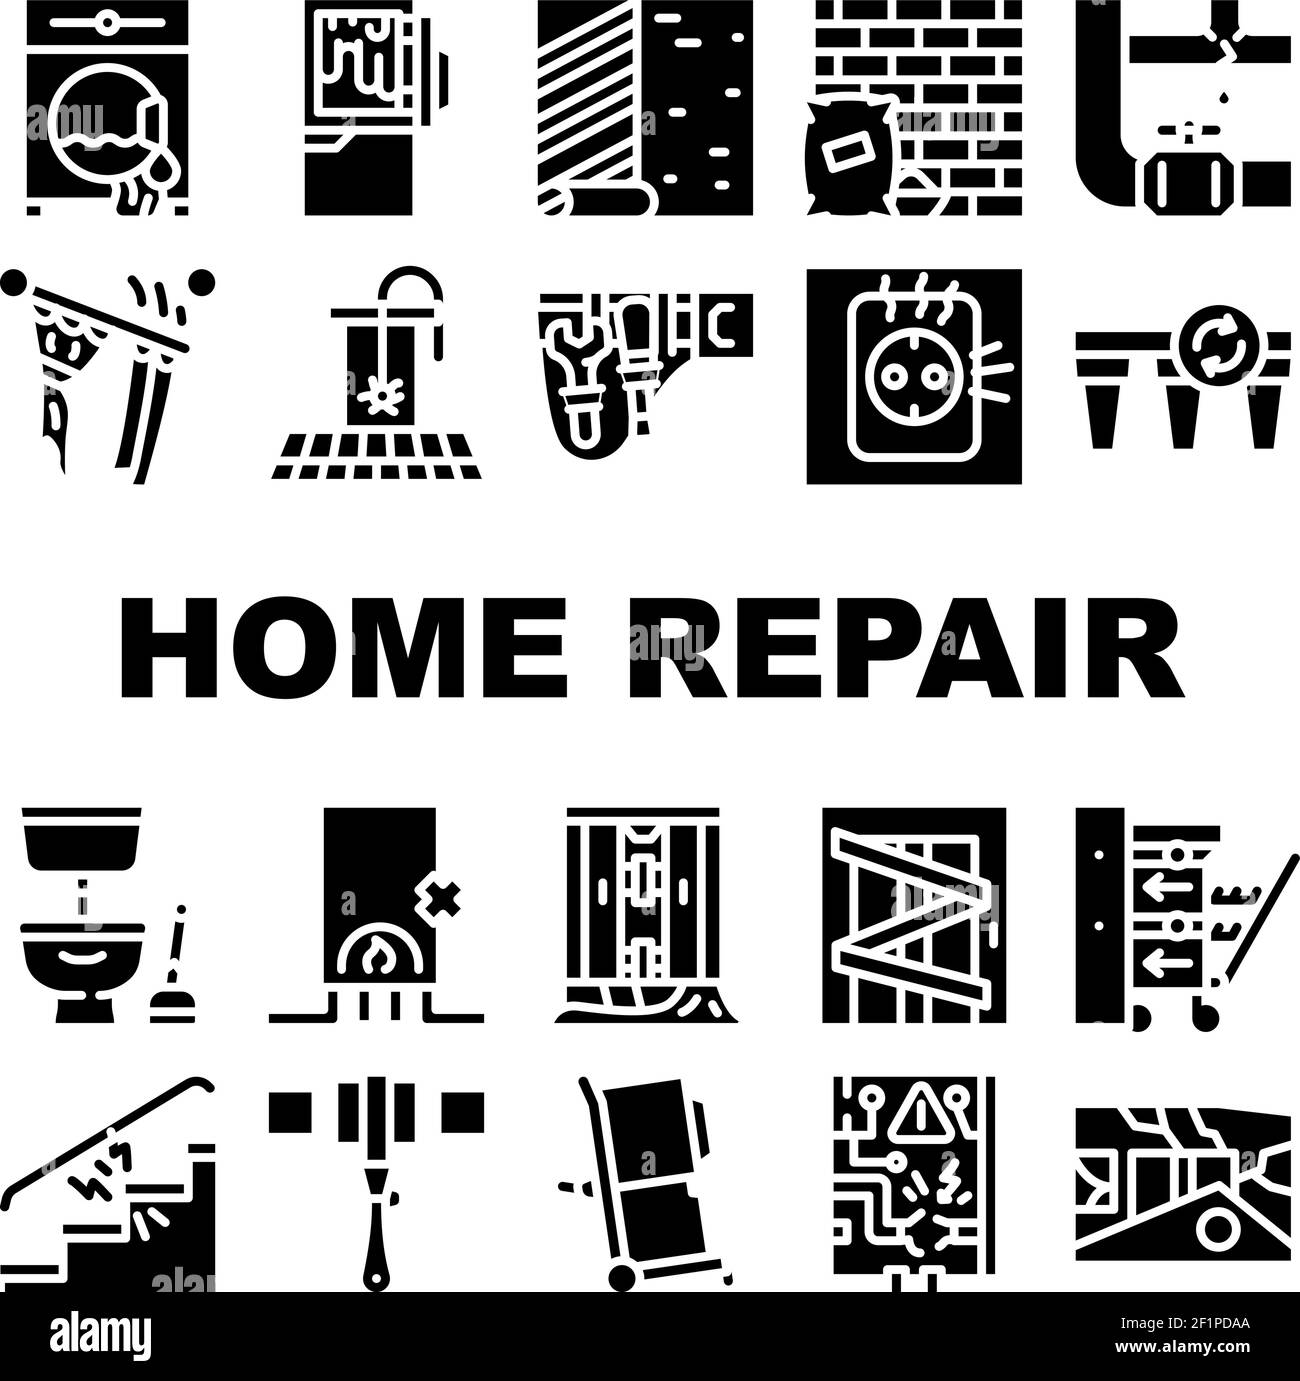 Home Repair Service Collection Icons Set Vector Stock Vector